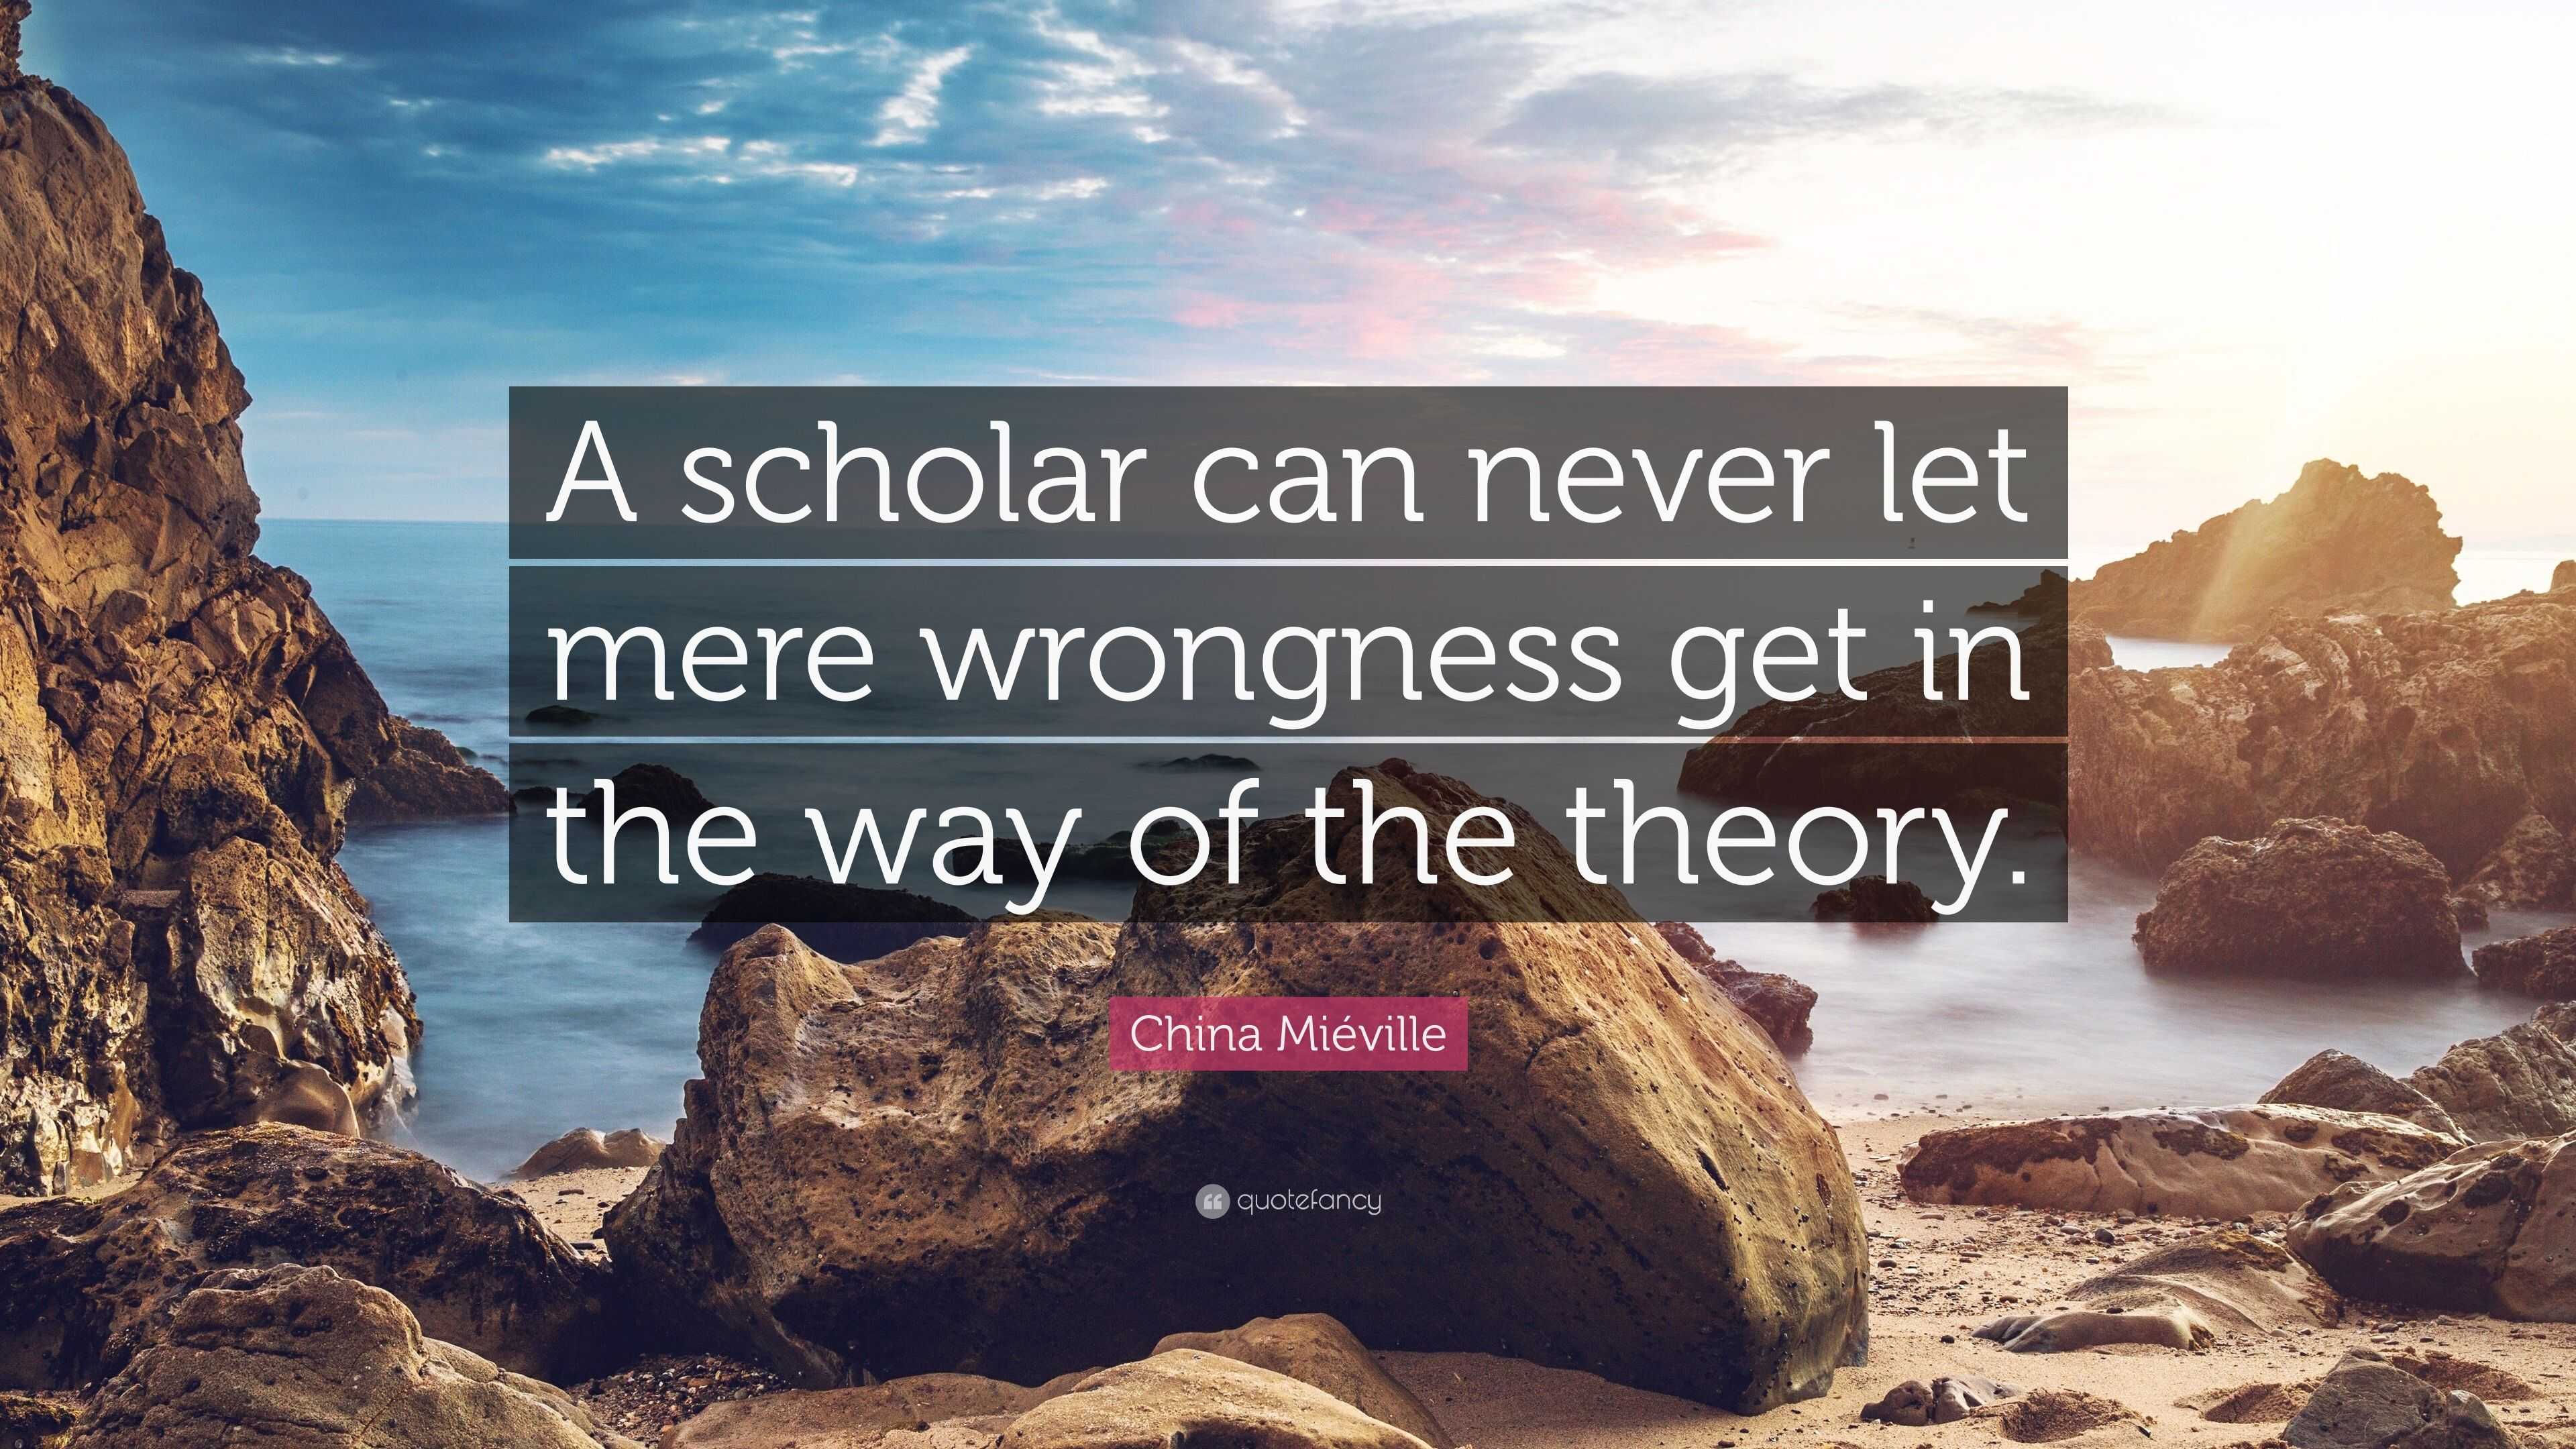 China Miéville Quote: “A scholar can never let mere wrongness get in ...